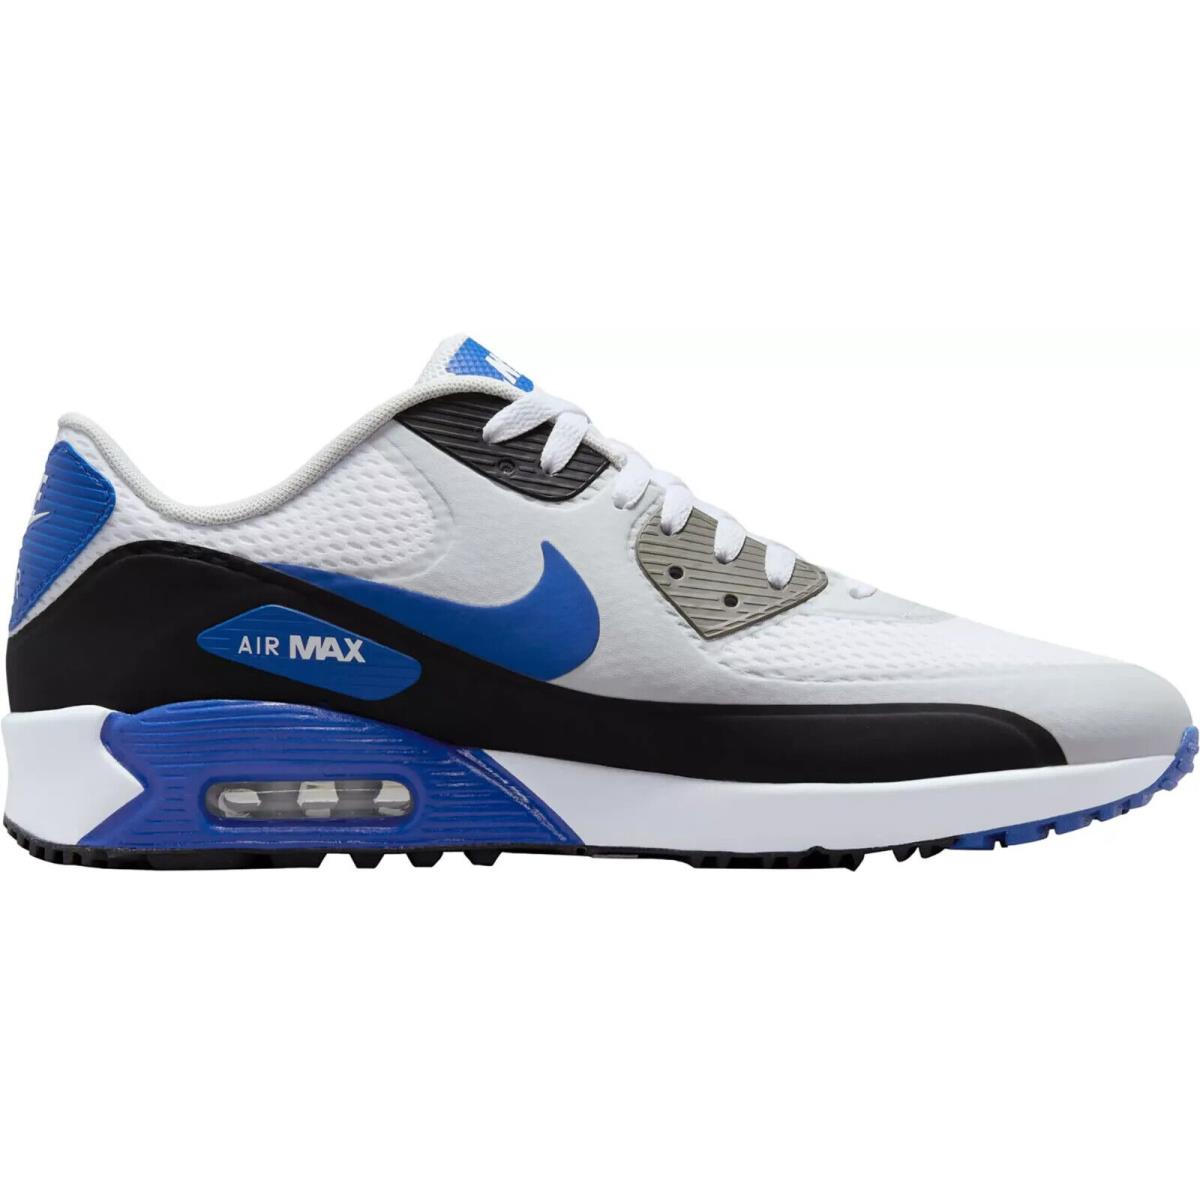 Nike Air Max 90 G Men`s Golf Shoes All Colors US Sizes 7-14 White/Black/Photon Dust/Game Royal